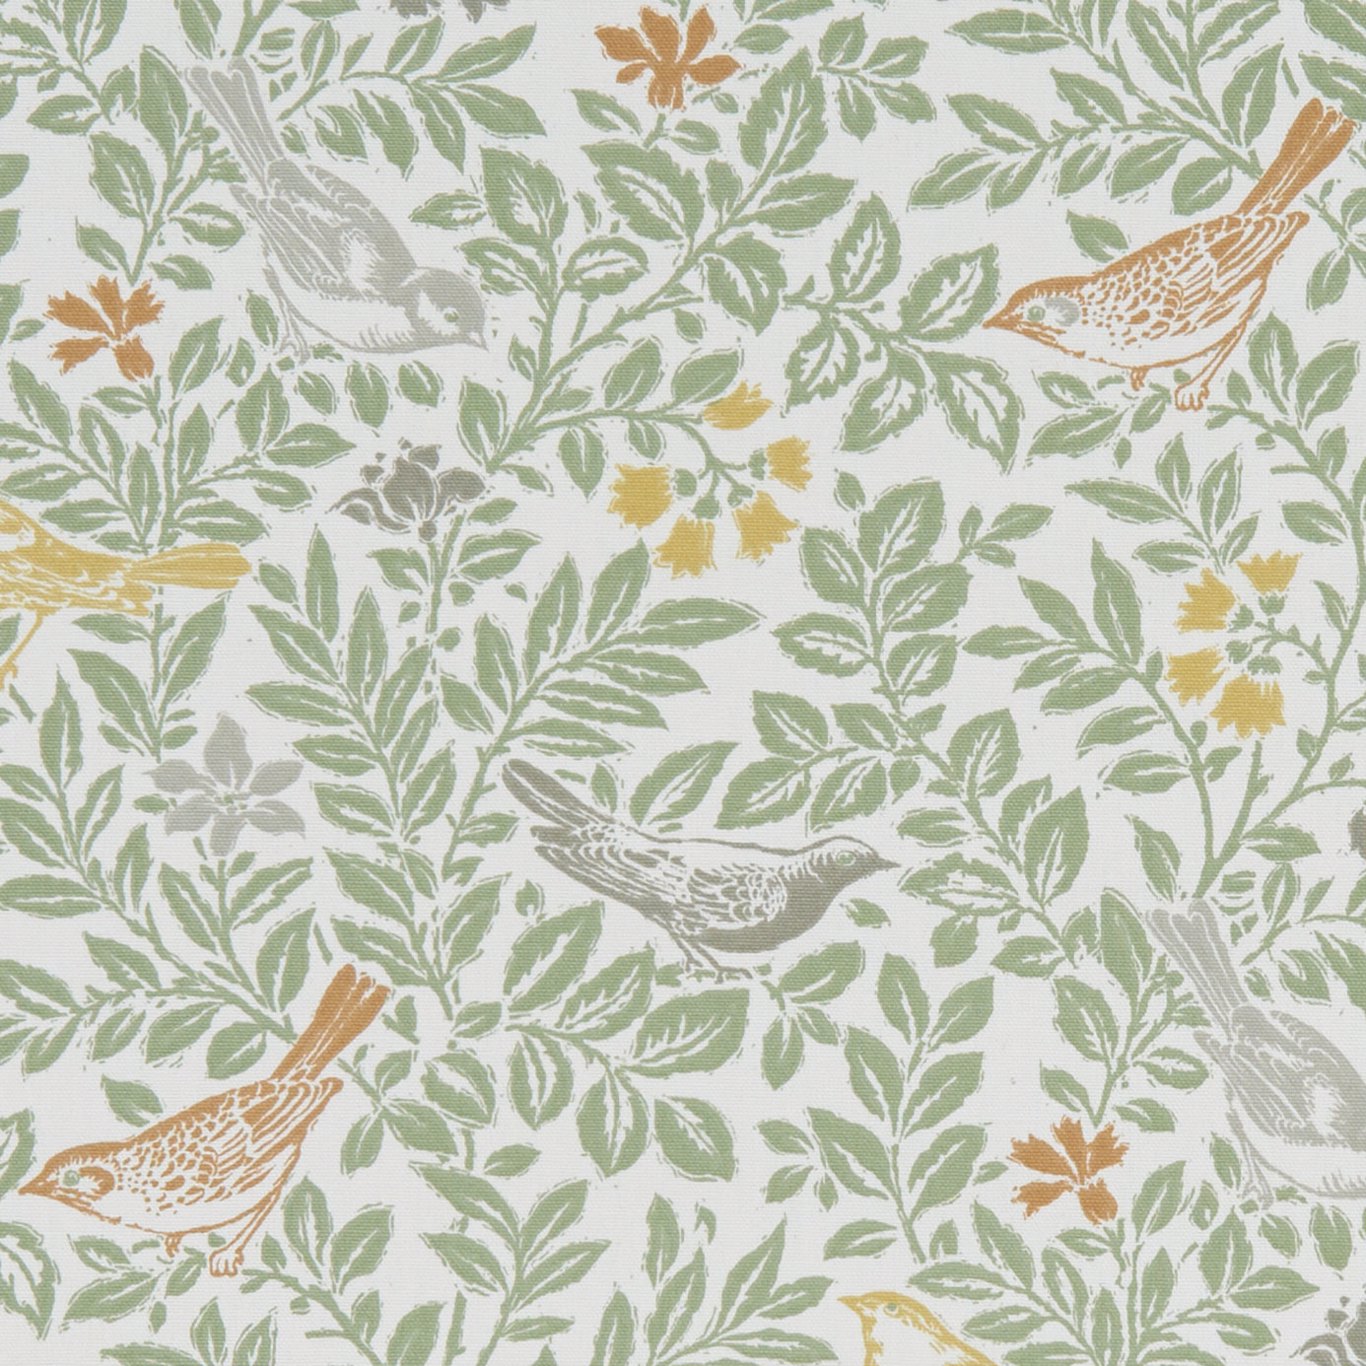 Bird Song Song Autumn Fabric by CNC